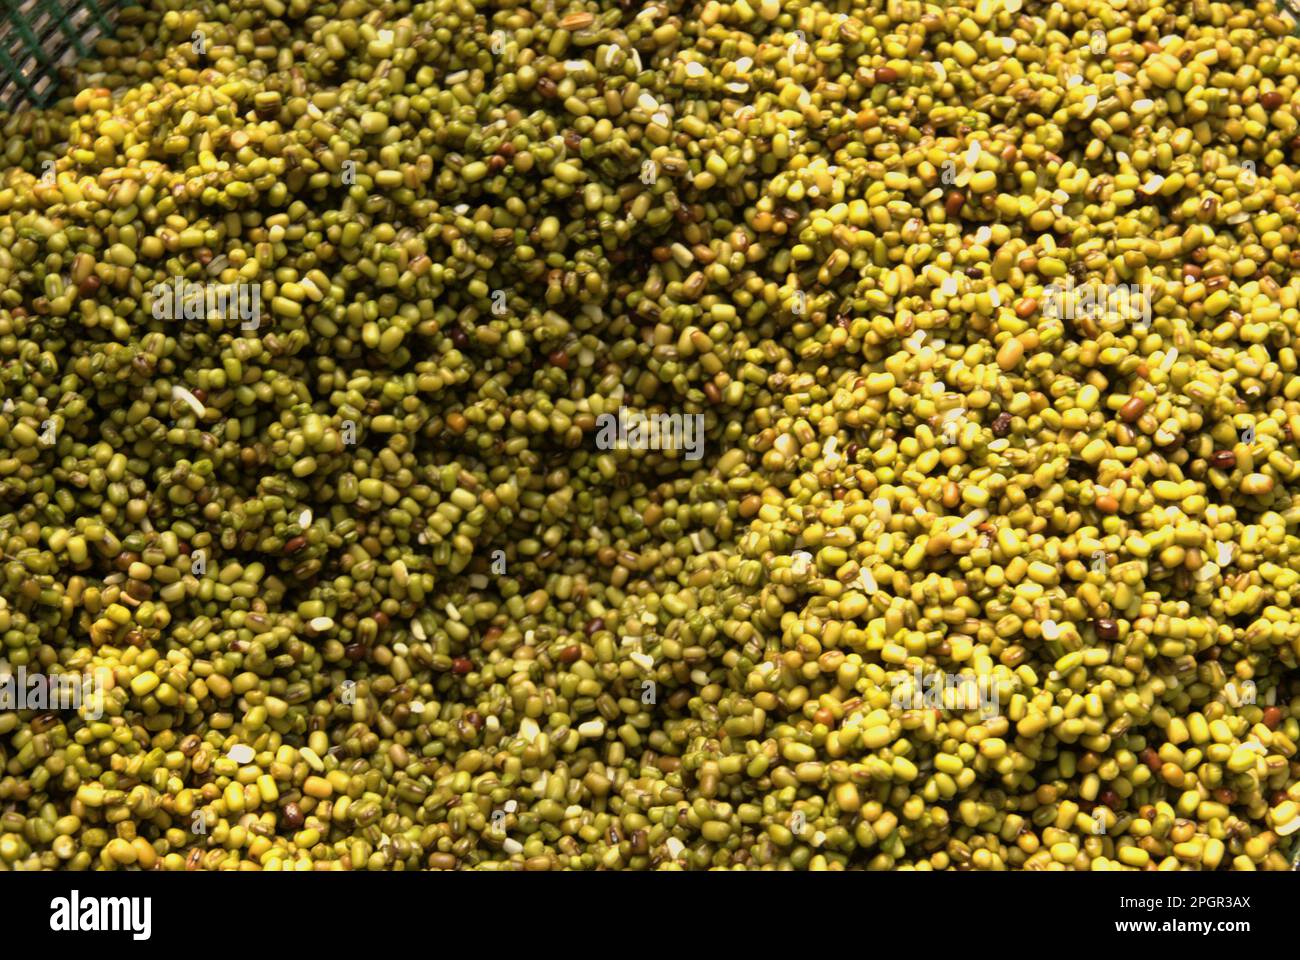 Mung beans (Vigna radiata) are photographed at a bean sprout farm in Jakarta, Indonesia. Stock Photo